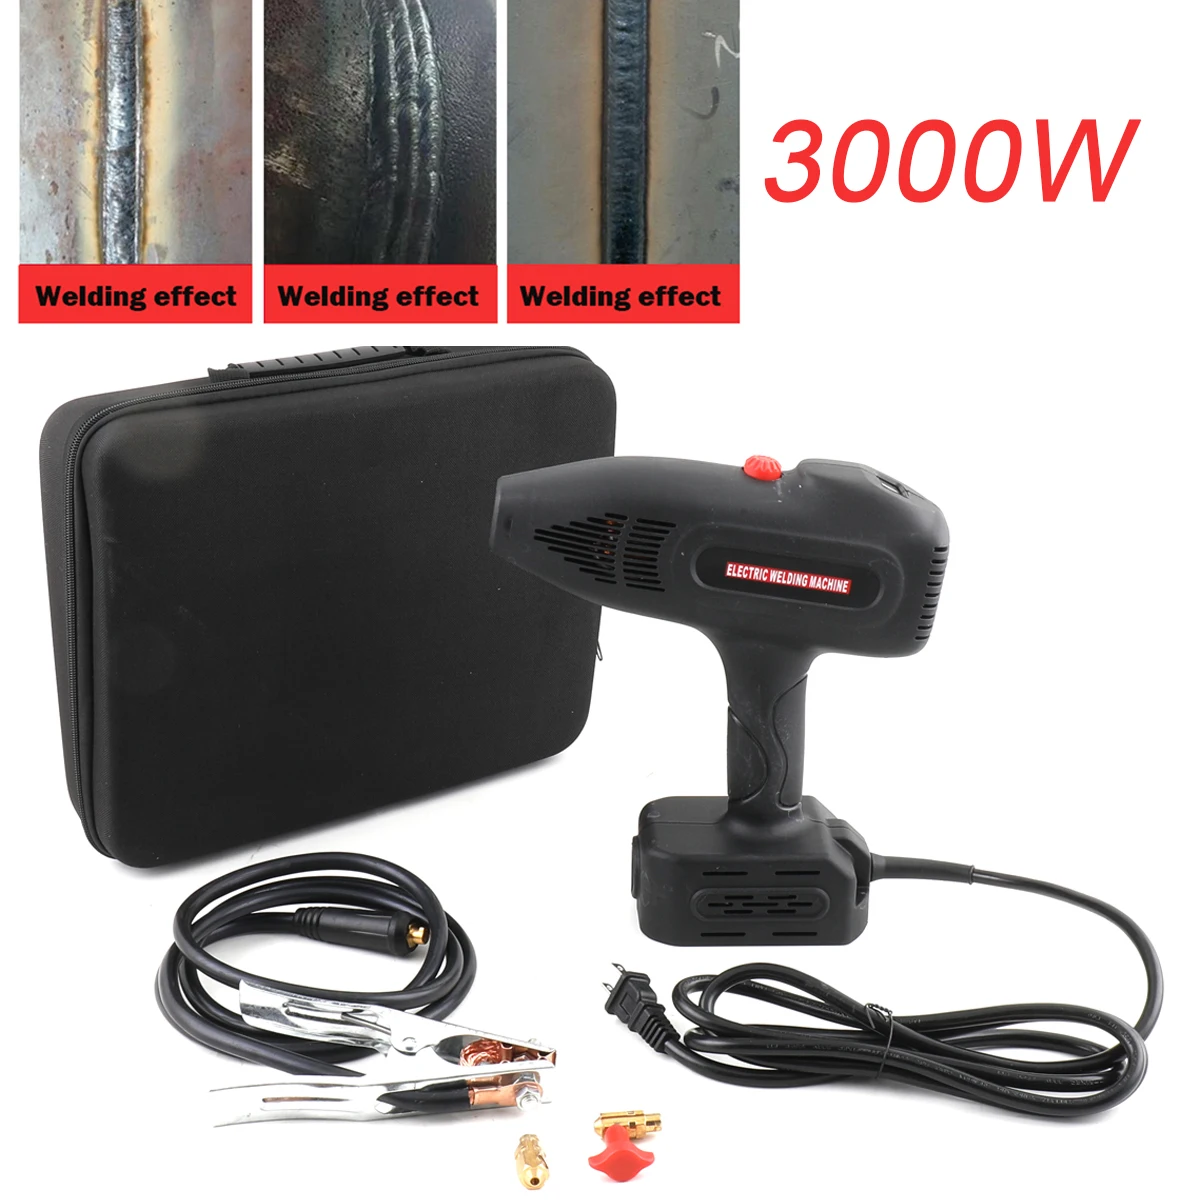 

3000W Handheld Portable Electric Arc Automatic Welding Machin Current Adjustment 110V for 2.0-3.2mm Electrodes